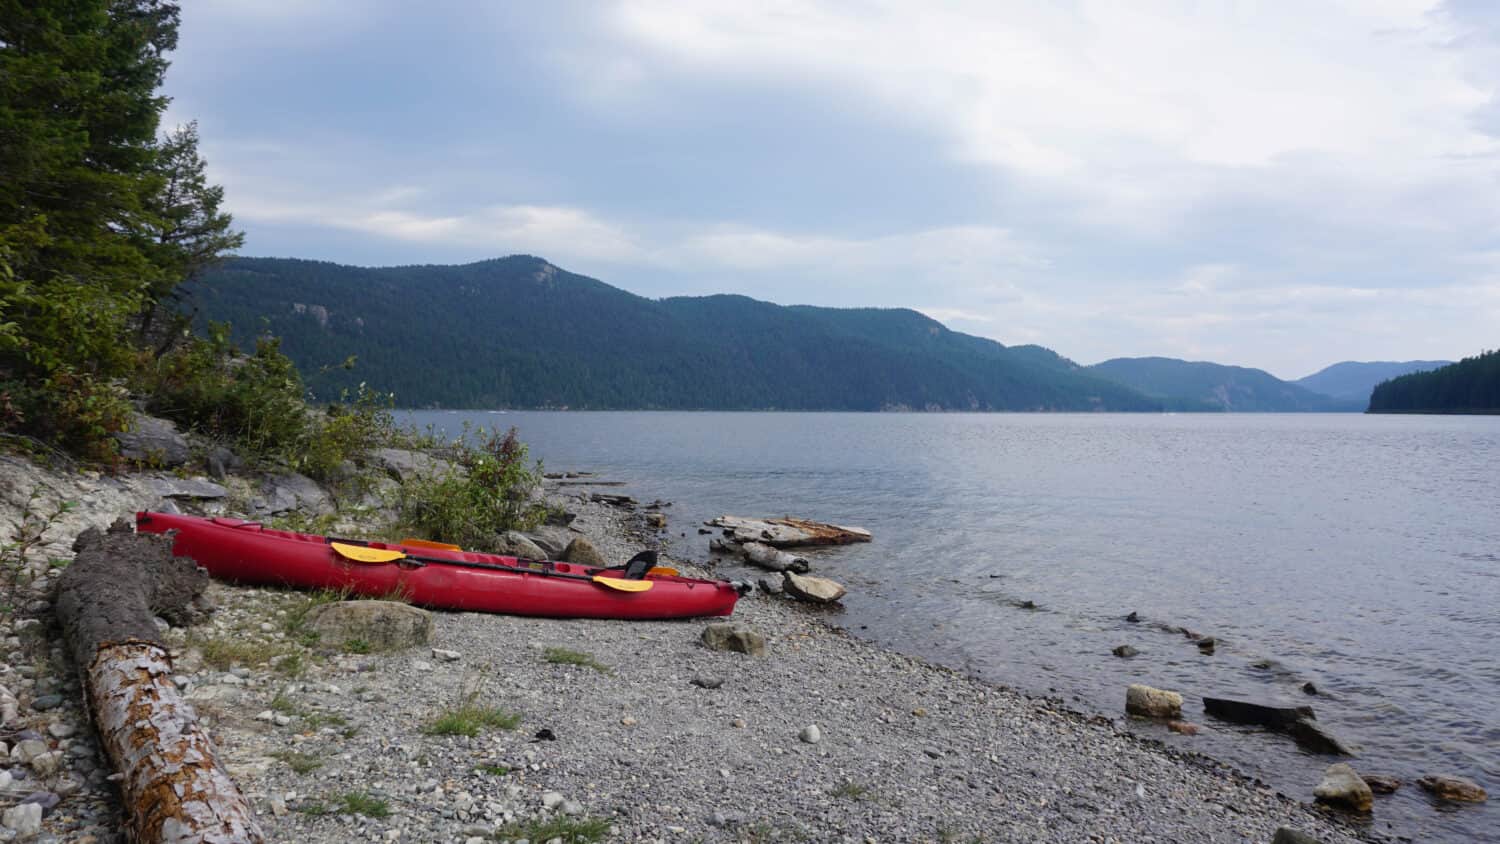 A picture of a red kayak sitting on the shore of a lake in Montana.